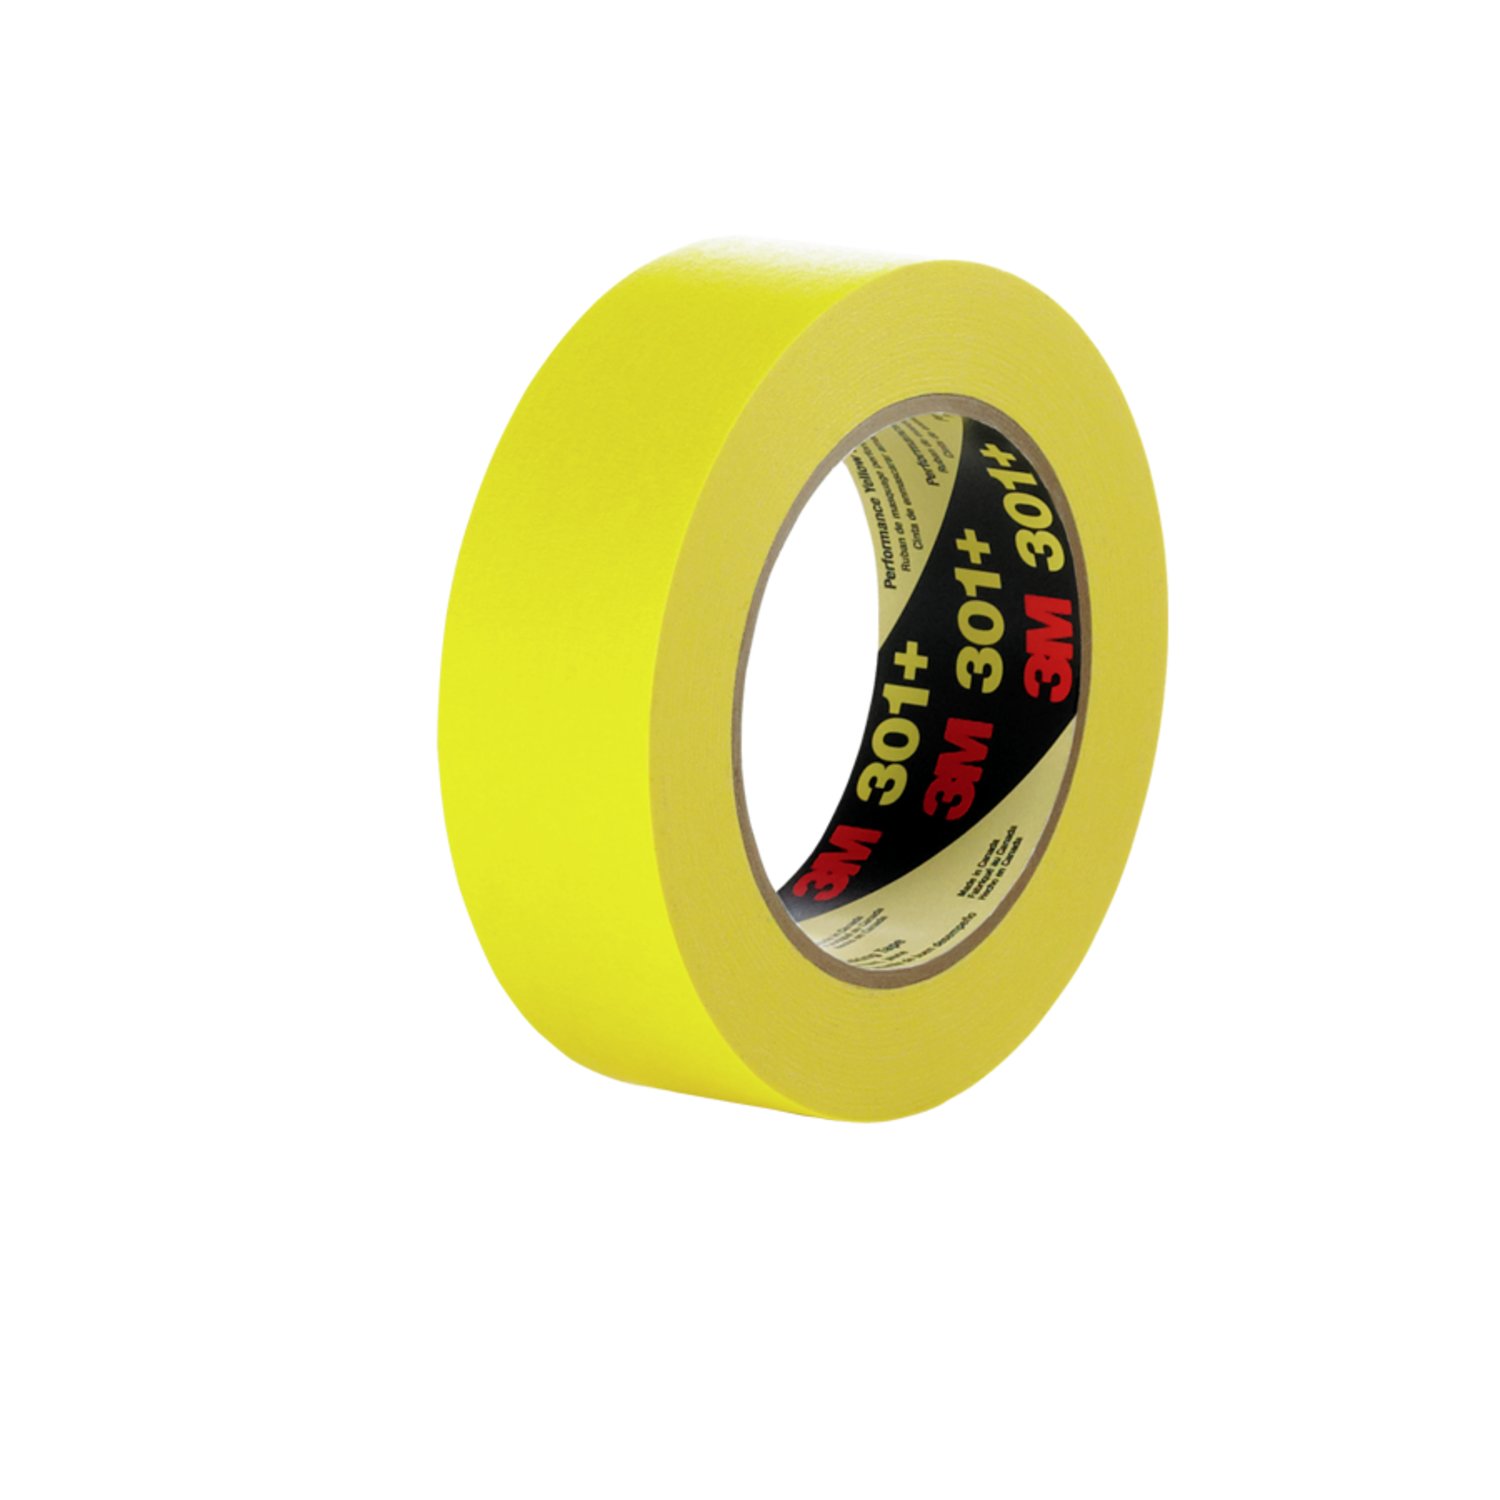 7000148419 - 3M Performance Yellow Masking Tape 301+, 24 mm x 55 m, 36 Roll/Case,
Individually Wrapped Conveniently Packaged